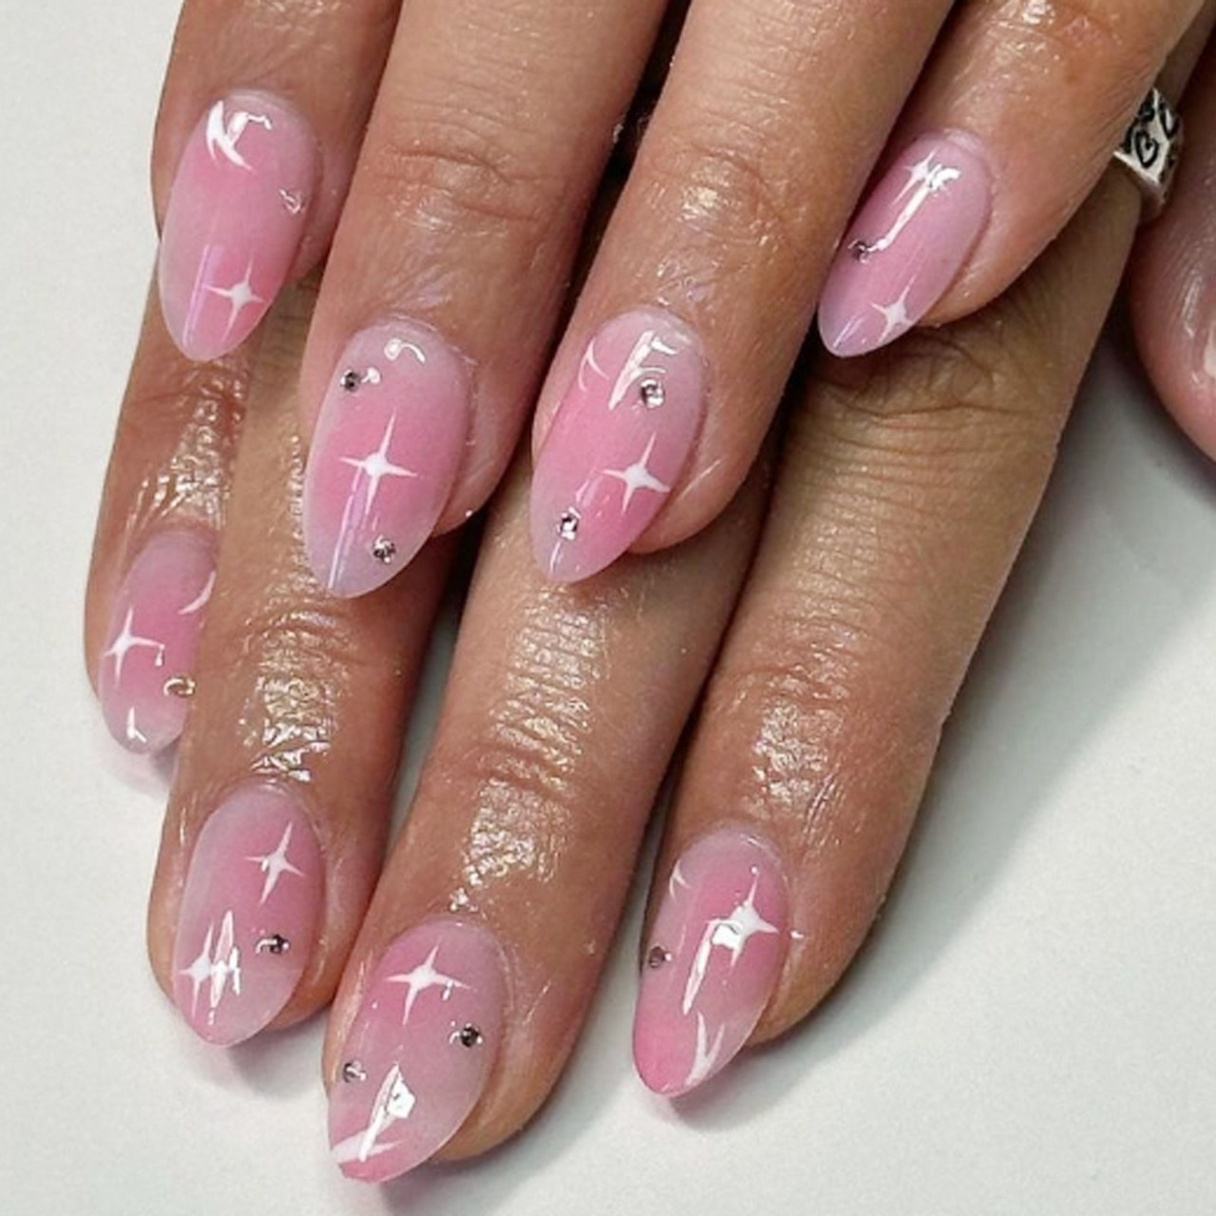 blush pink nail designs Bulan 1 Blush Nails: Soft Glam Meets YK Style for the Coolest Manicure